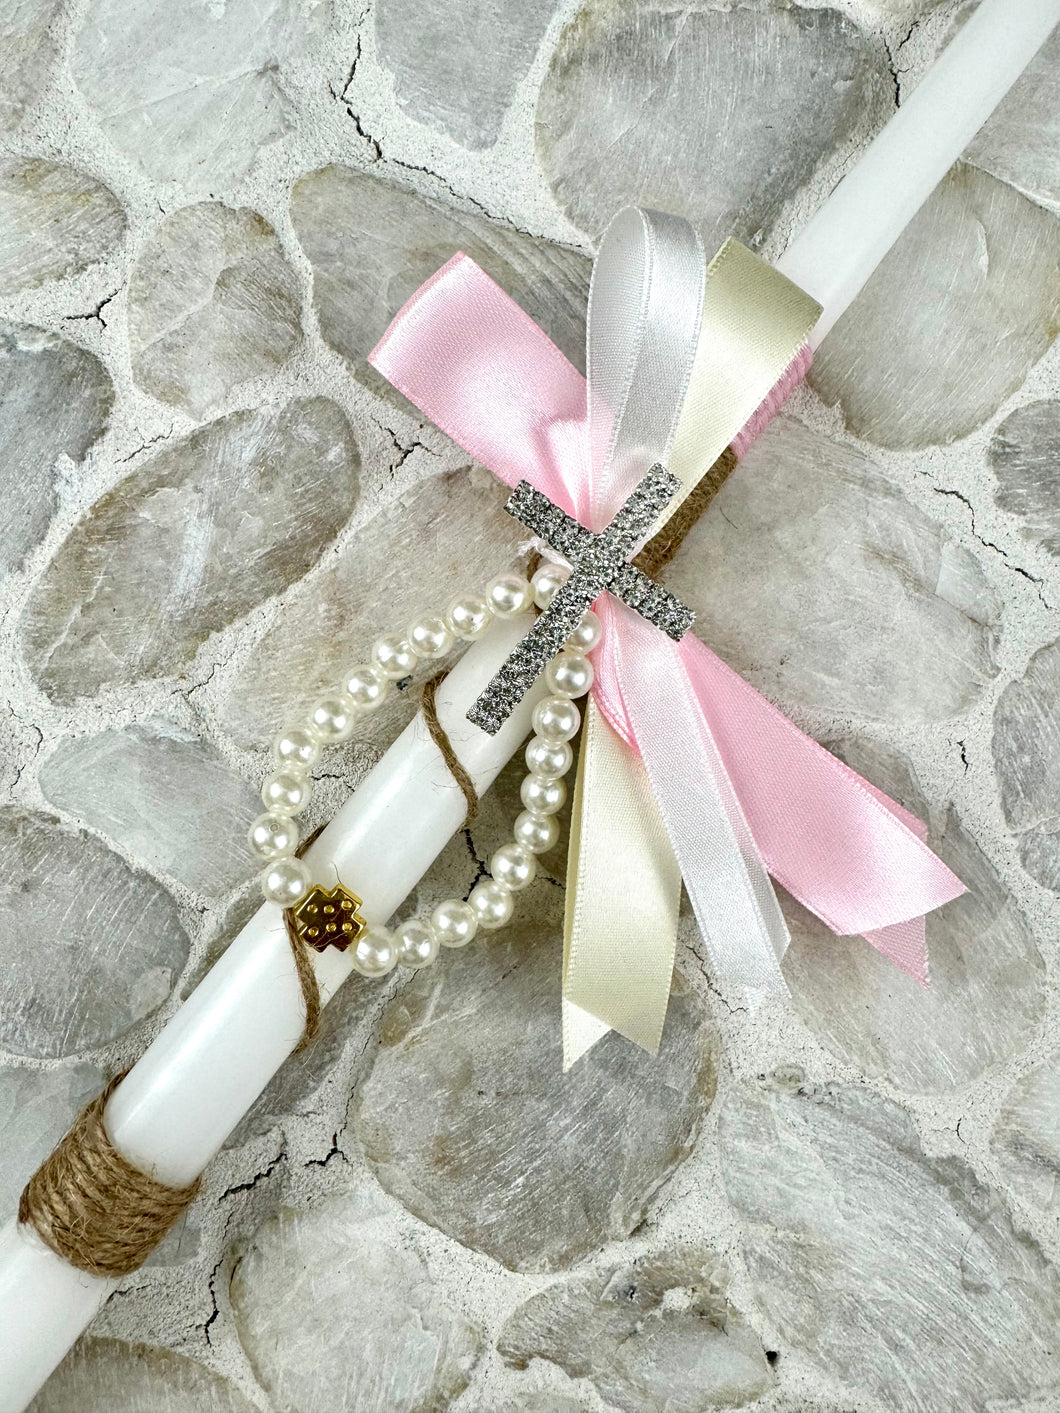 Corded Easter Candle with Cross Broach  EC2024220